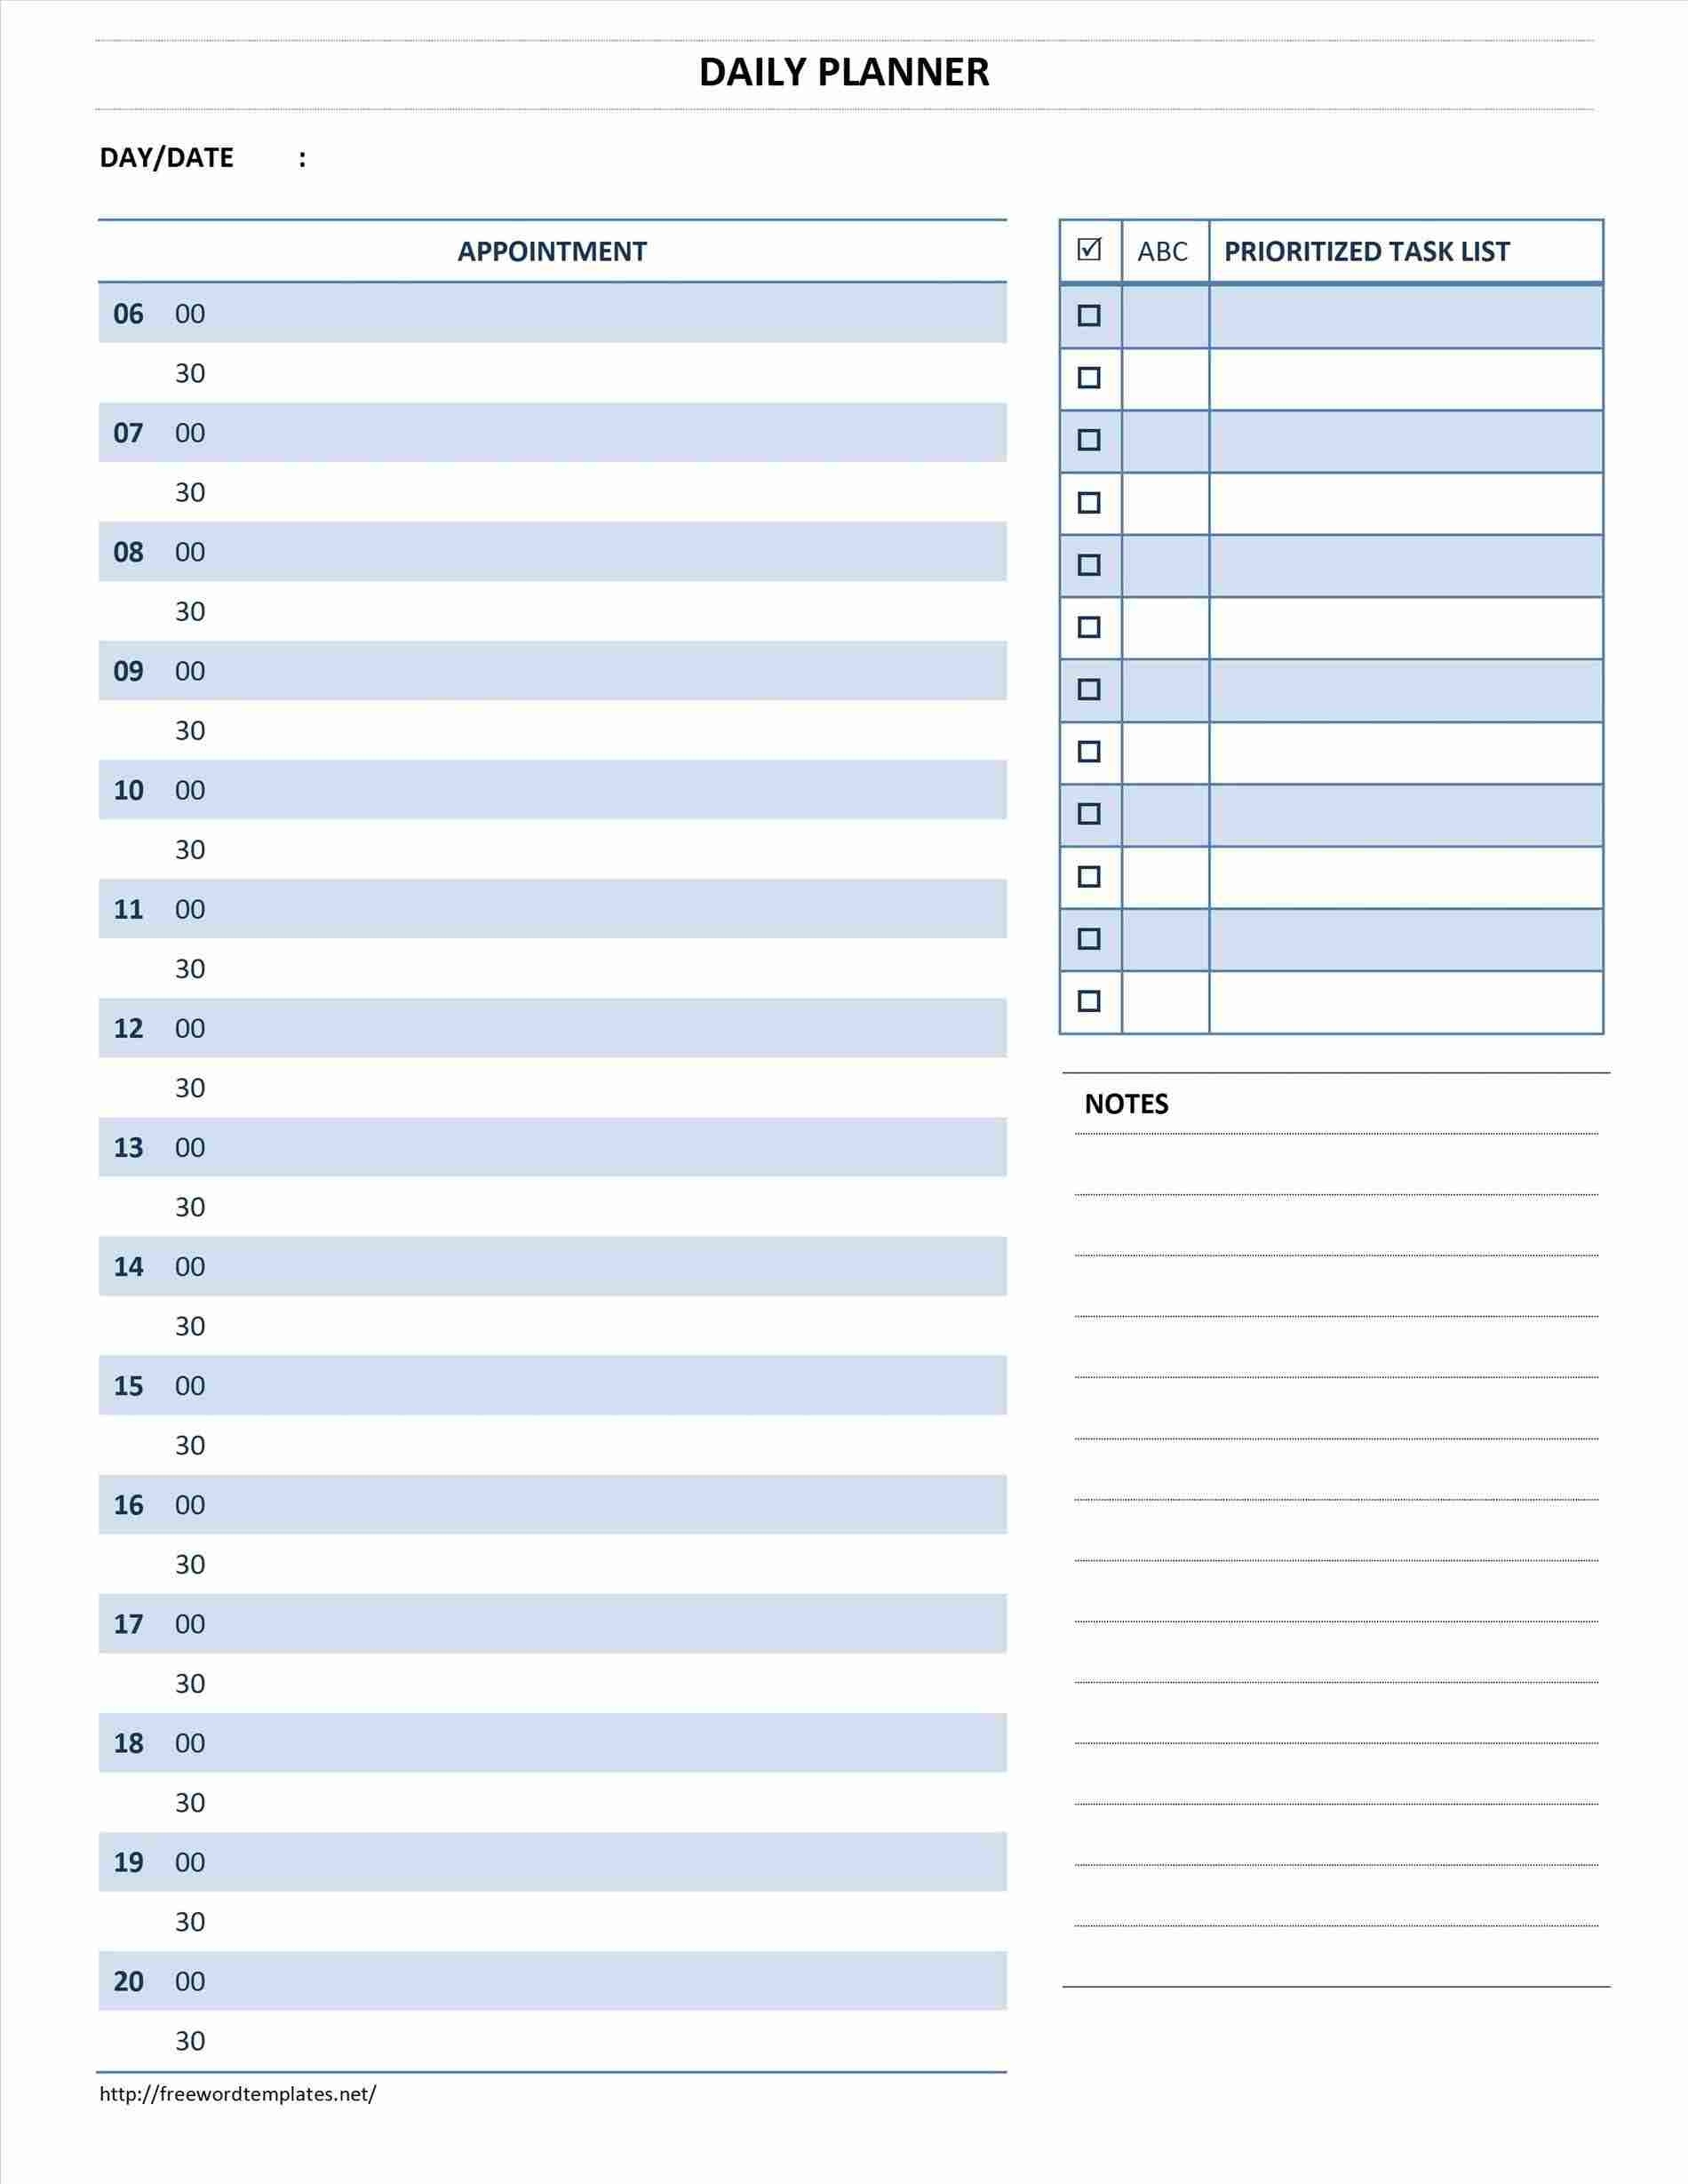 Daily Calendar Template 30 Minute Increments | Athens Eagle Wings  Free Printable Daily Calendar With Time Slots